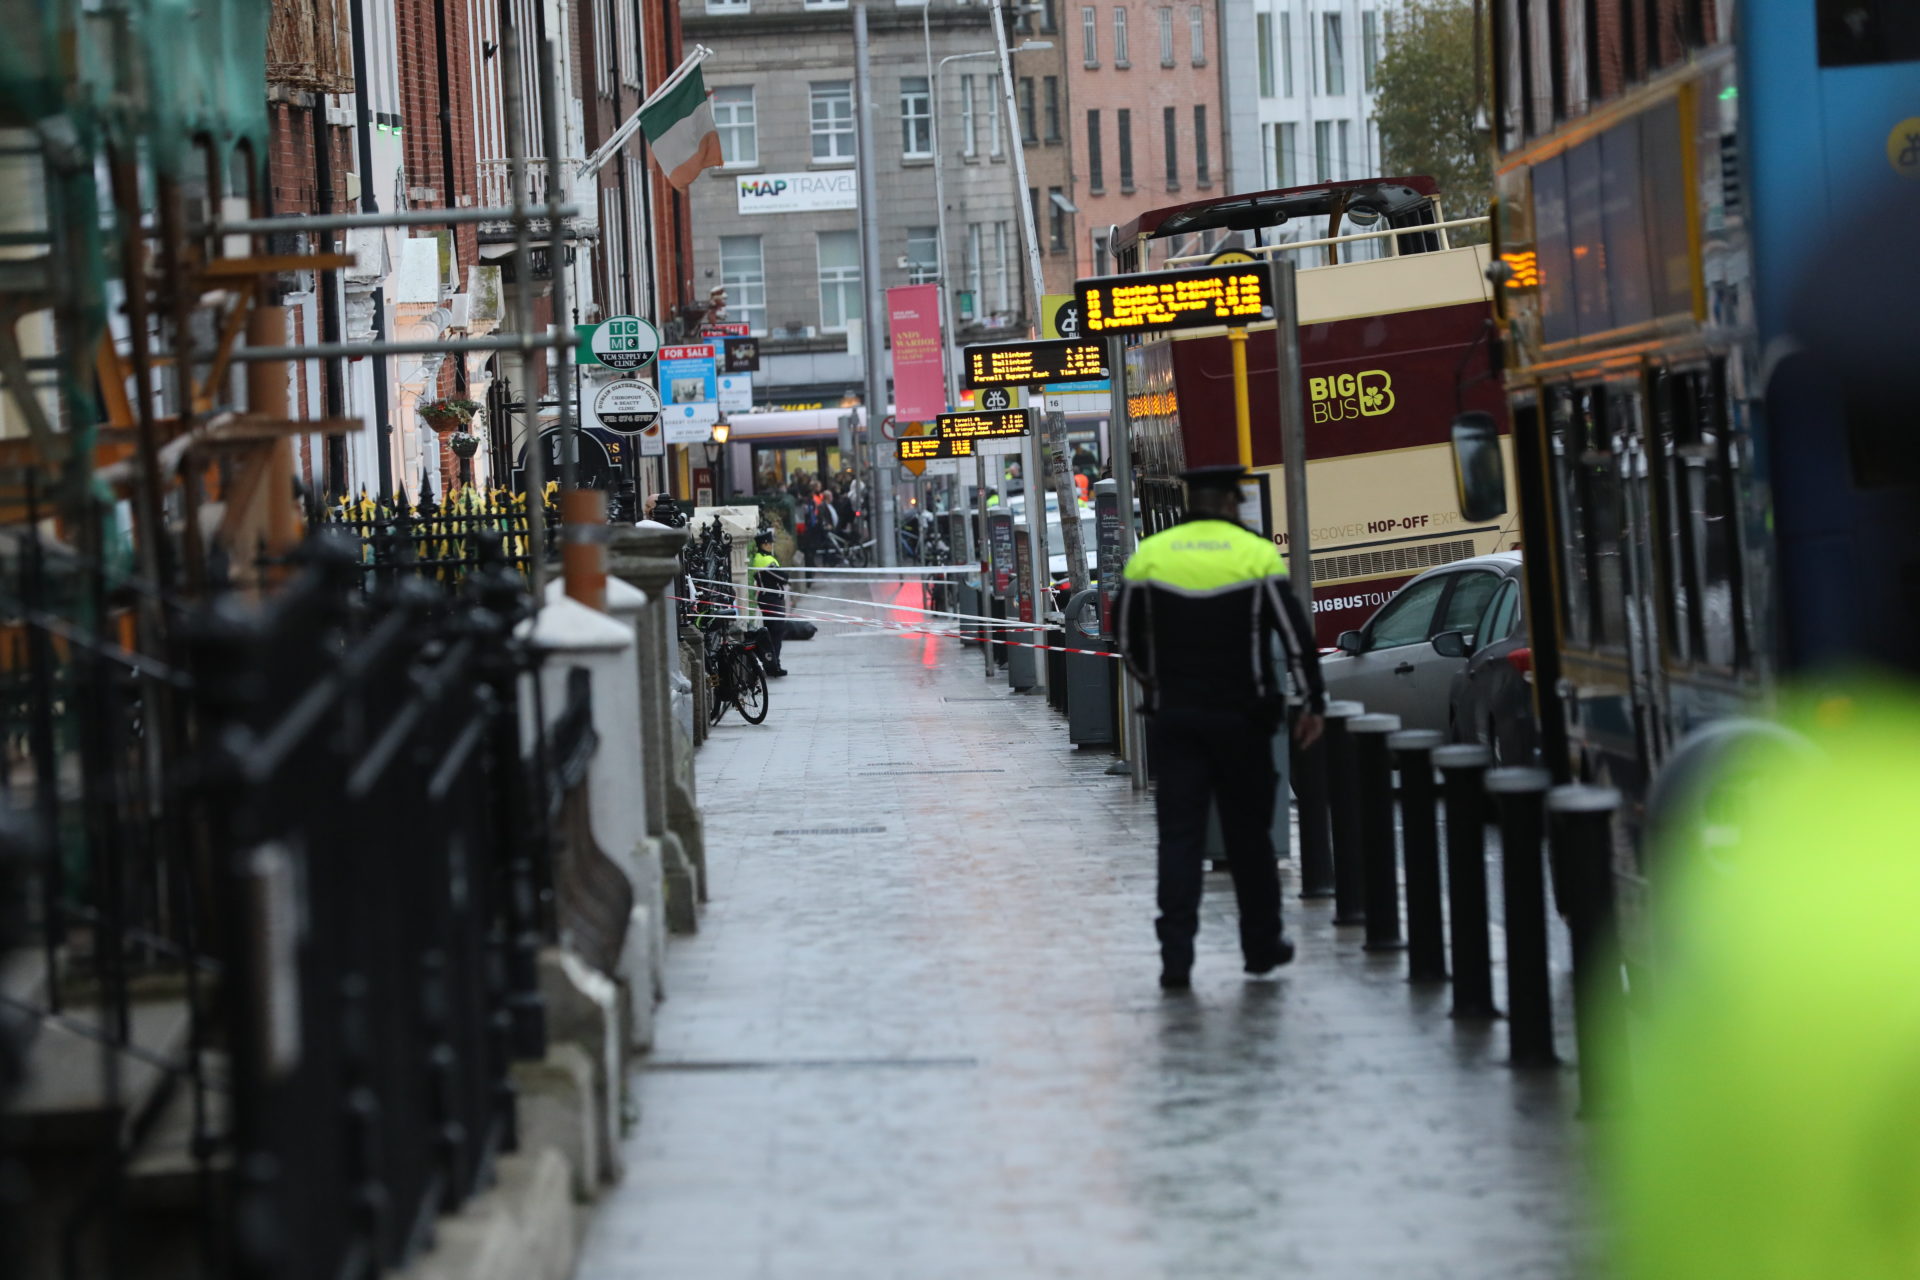 Parnell Square attack: Parents criticise lack of State support after stabbing